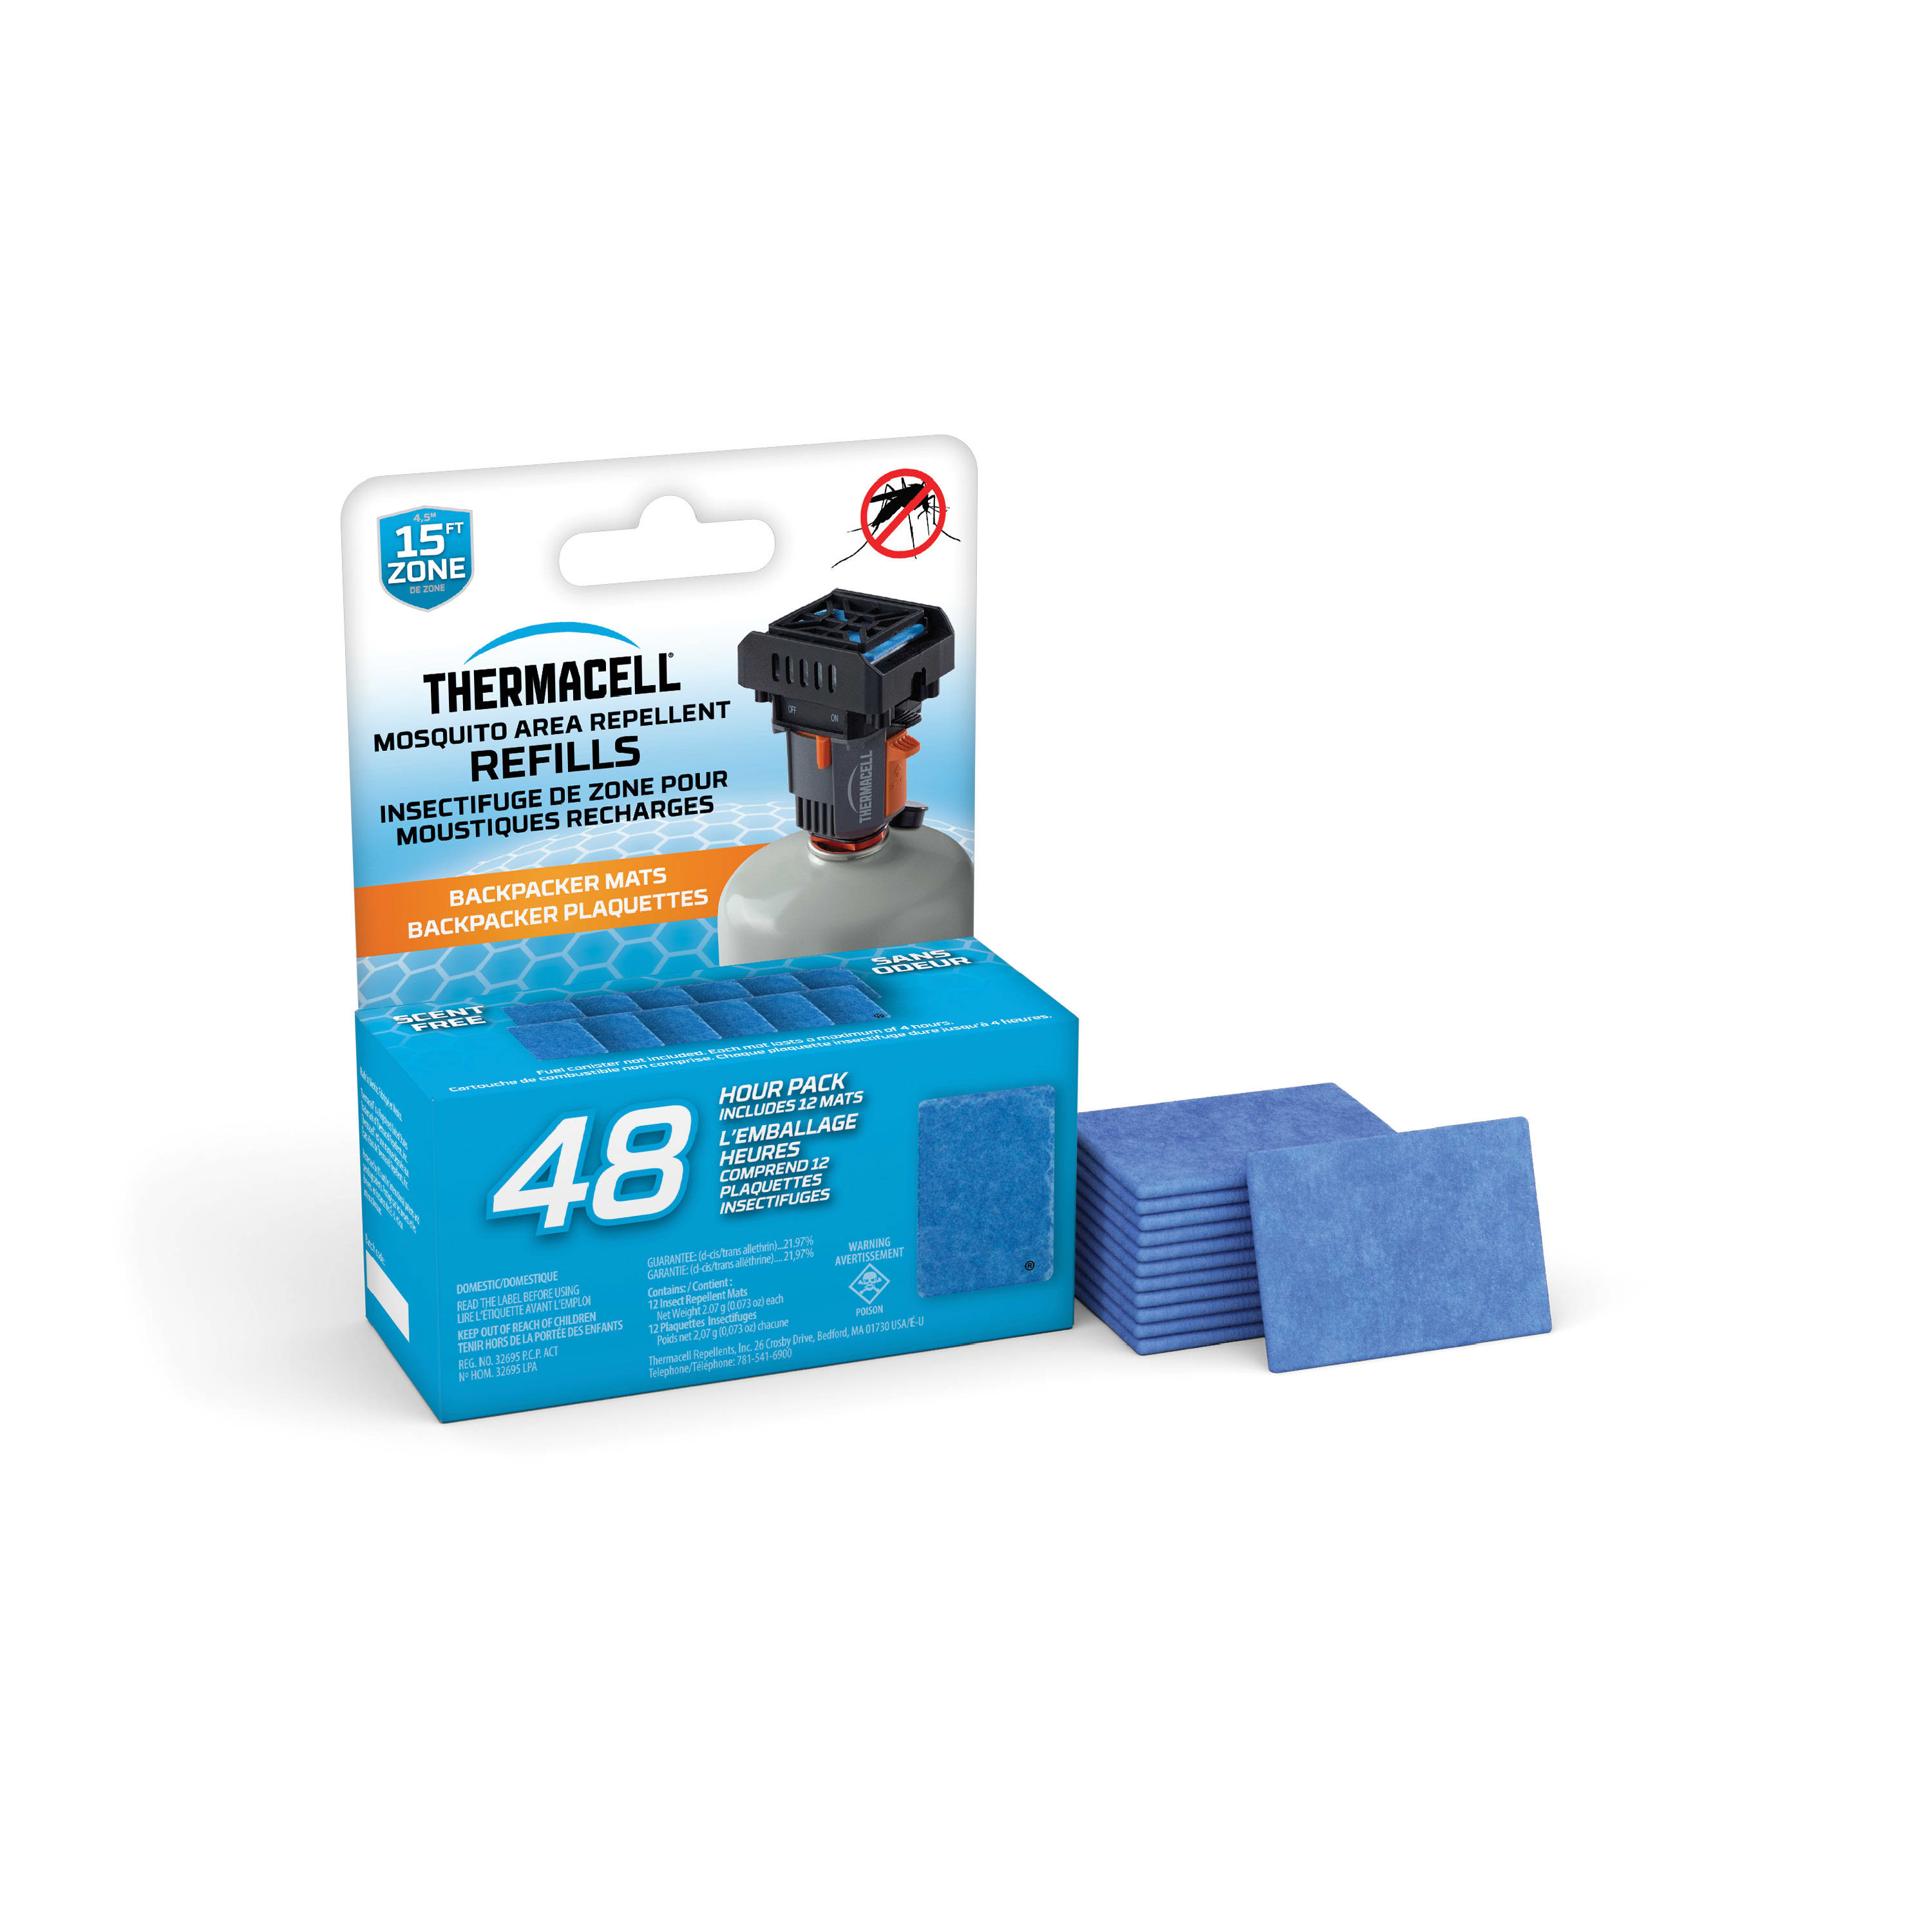 ThermaCELL® Backpacker Mat-Only Refills - 48 Hours